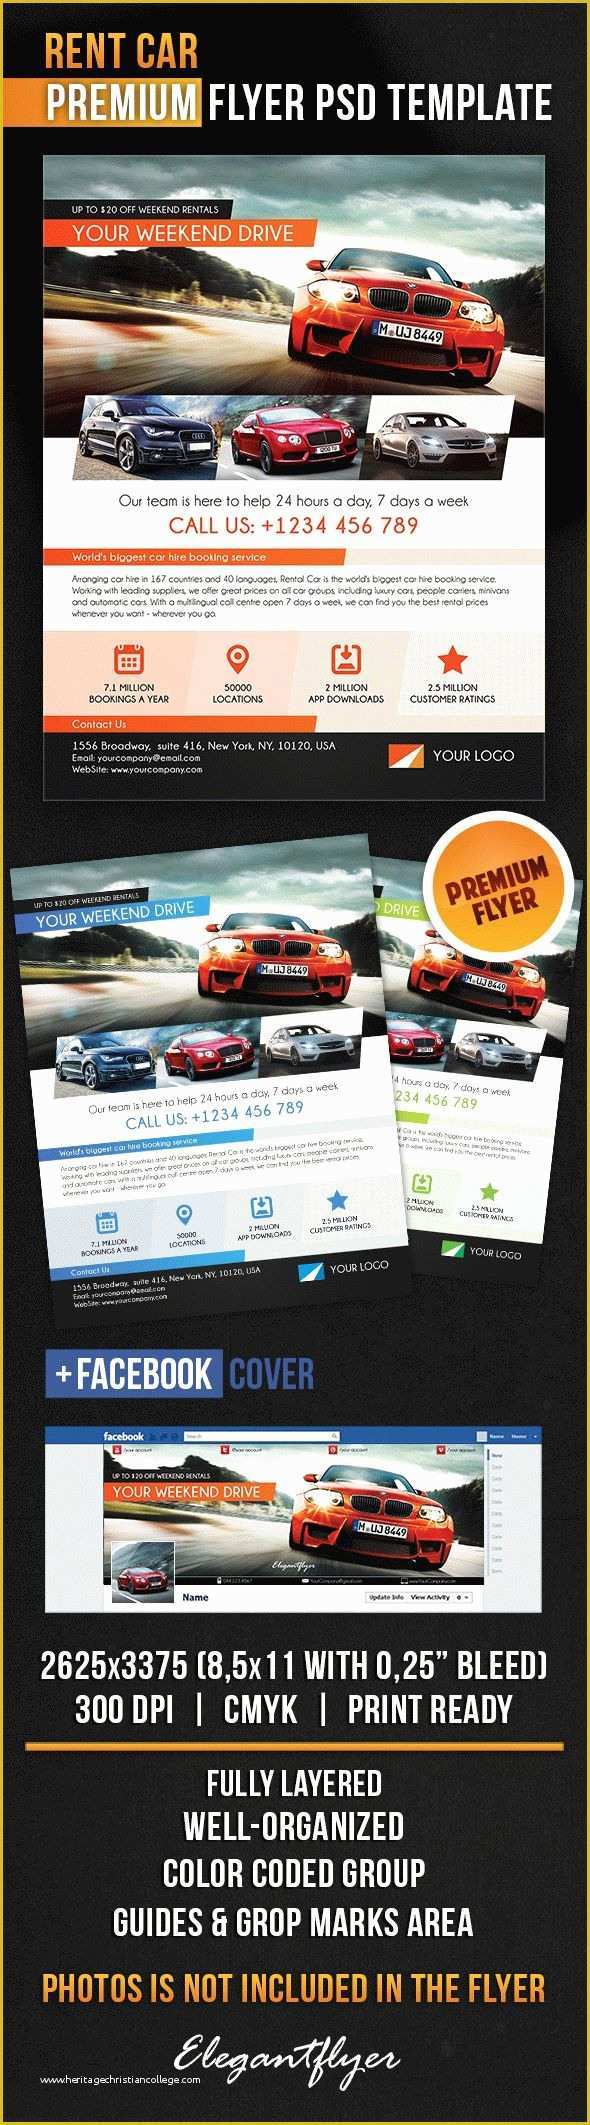 Free Like Us On Facebook Flyer Template Of Rent Car Flyer Psd Template Cover